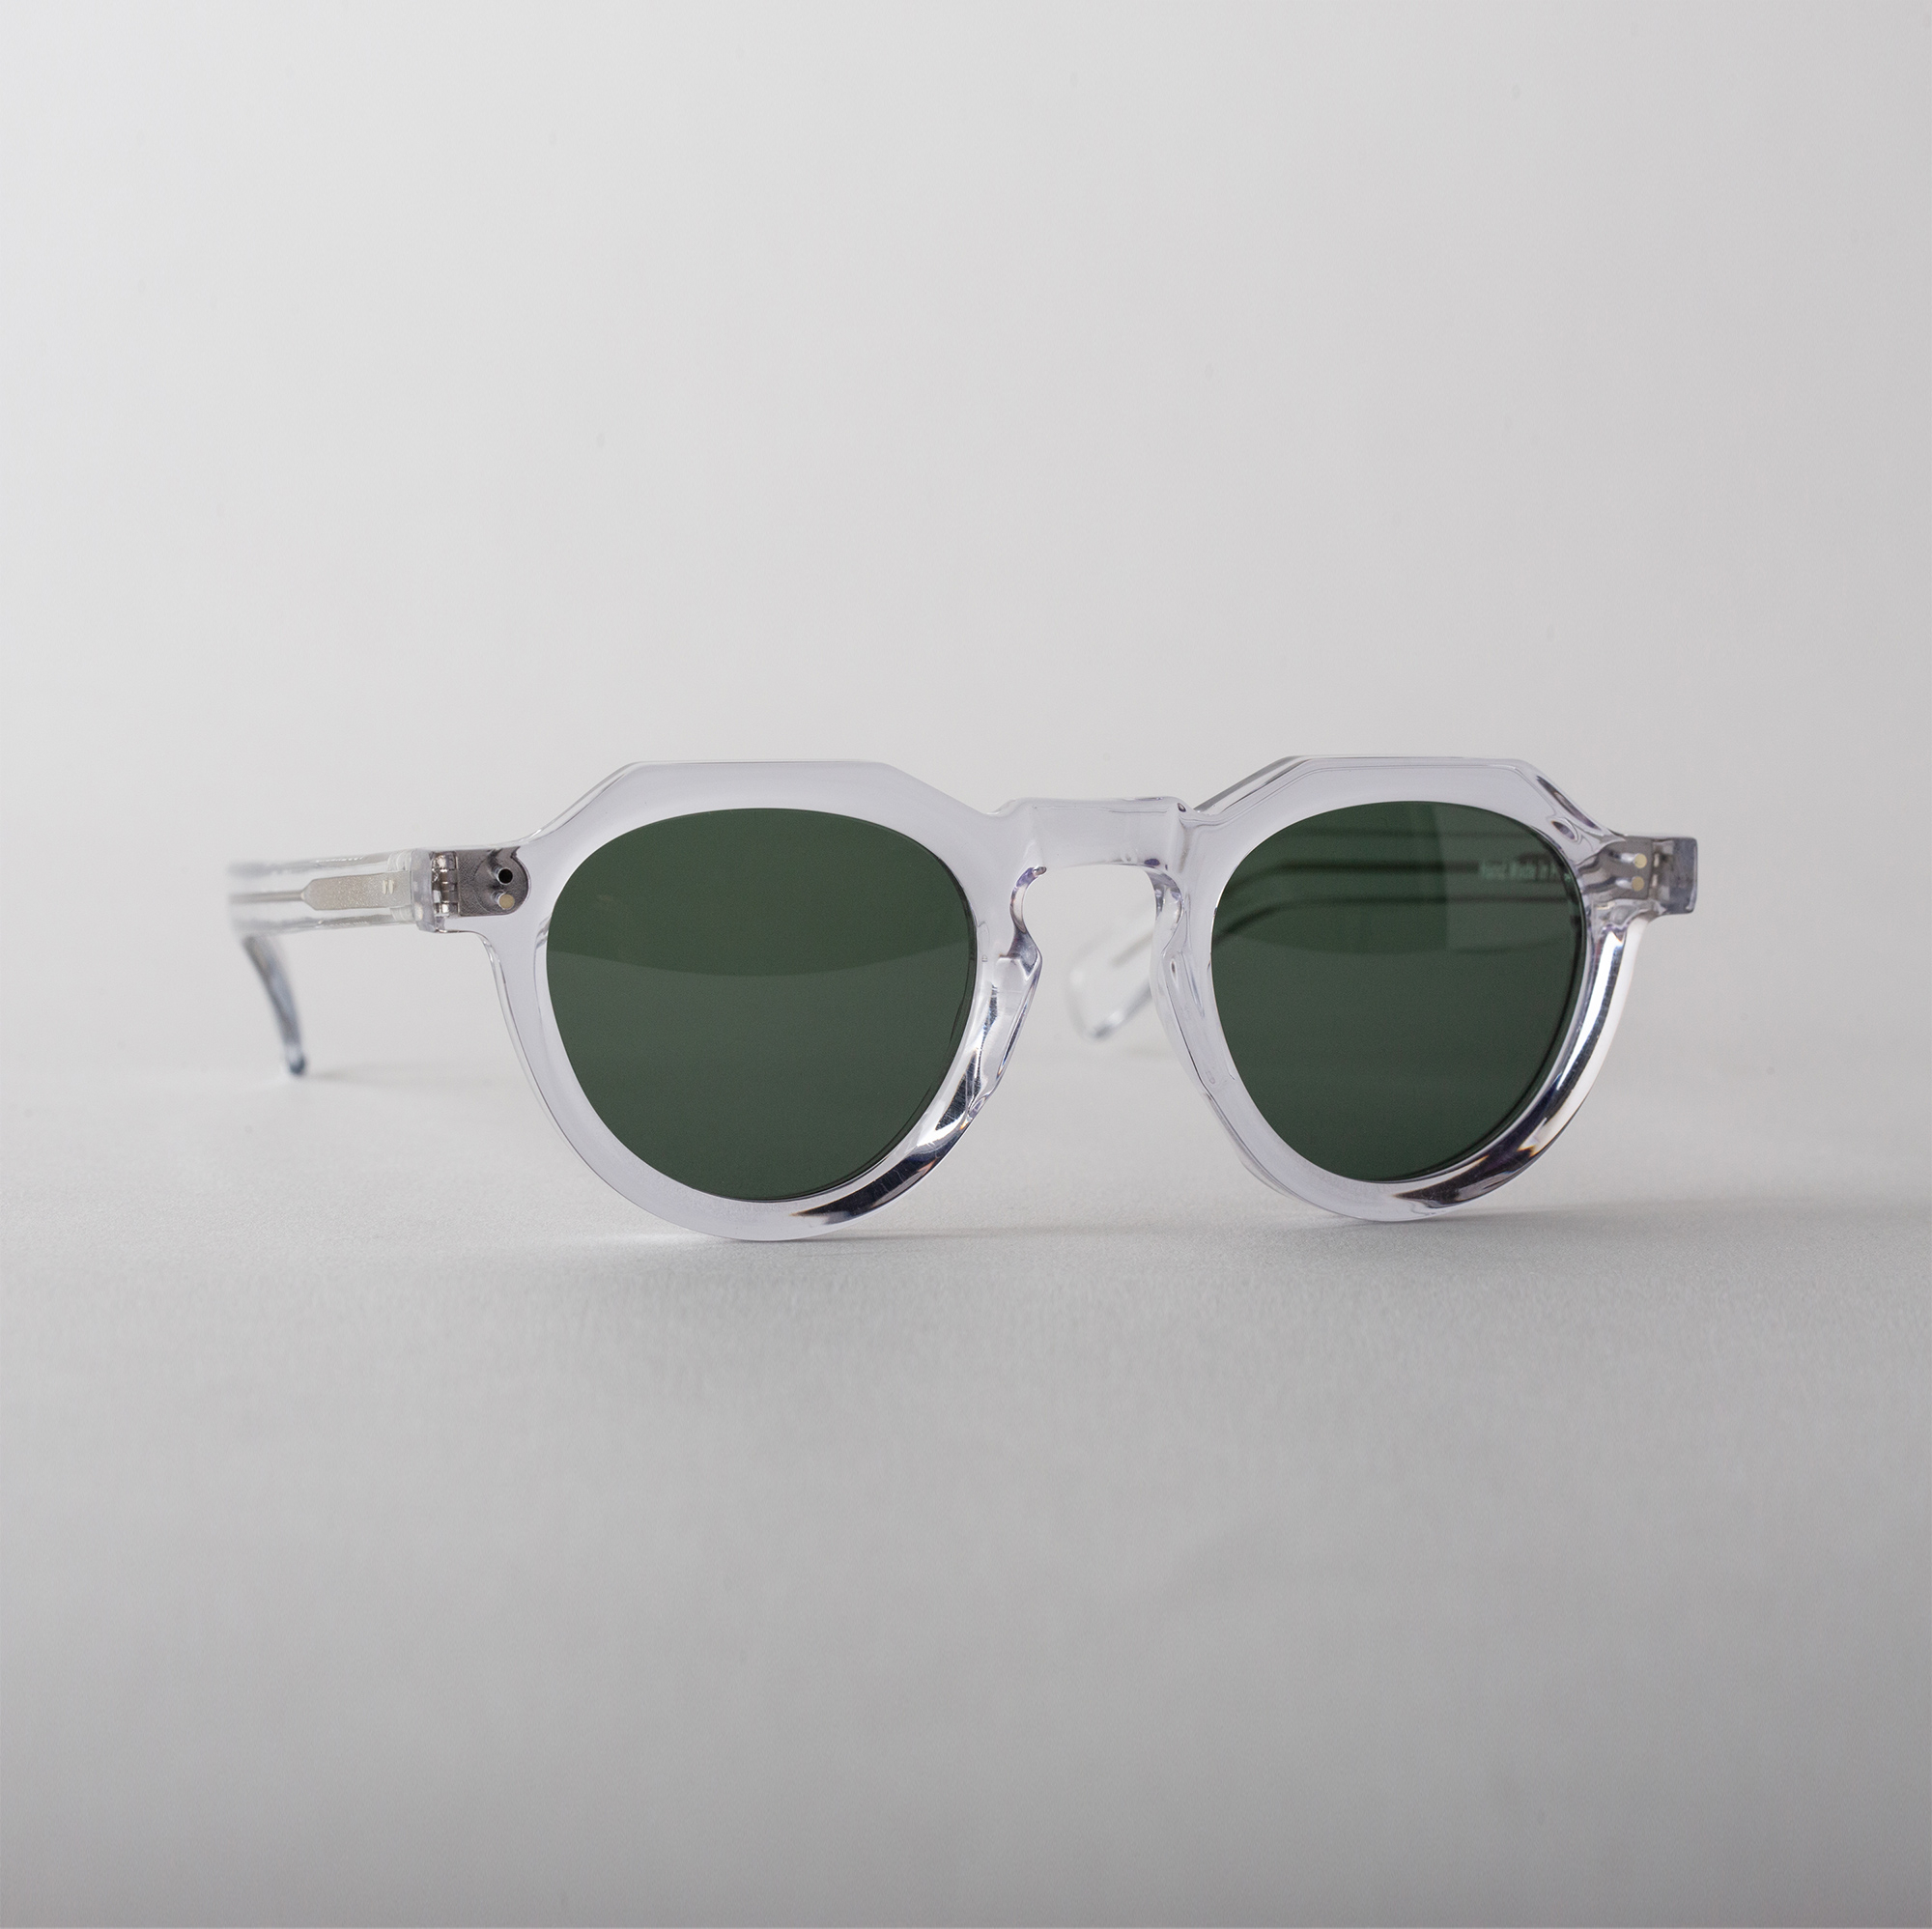 Sunglasses MOD.01 in Crystal color by Arpenteur